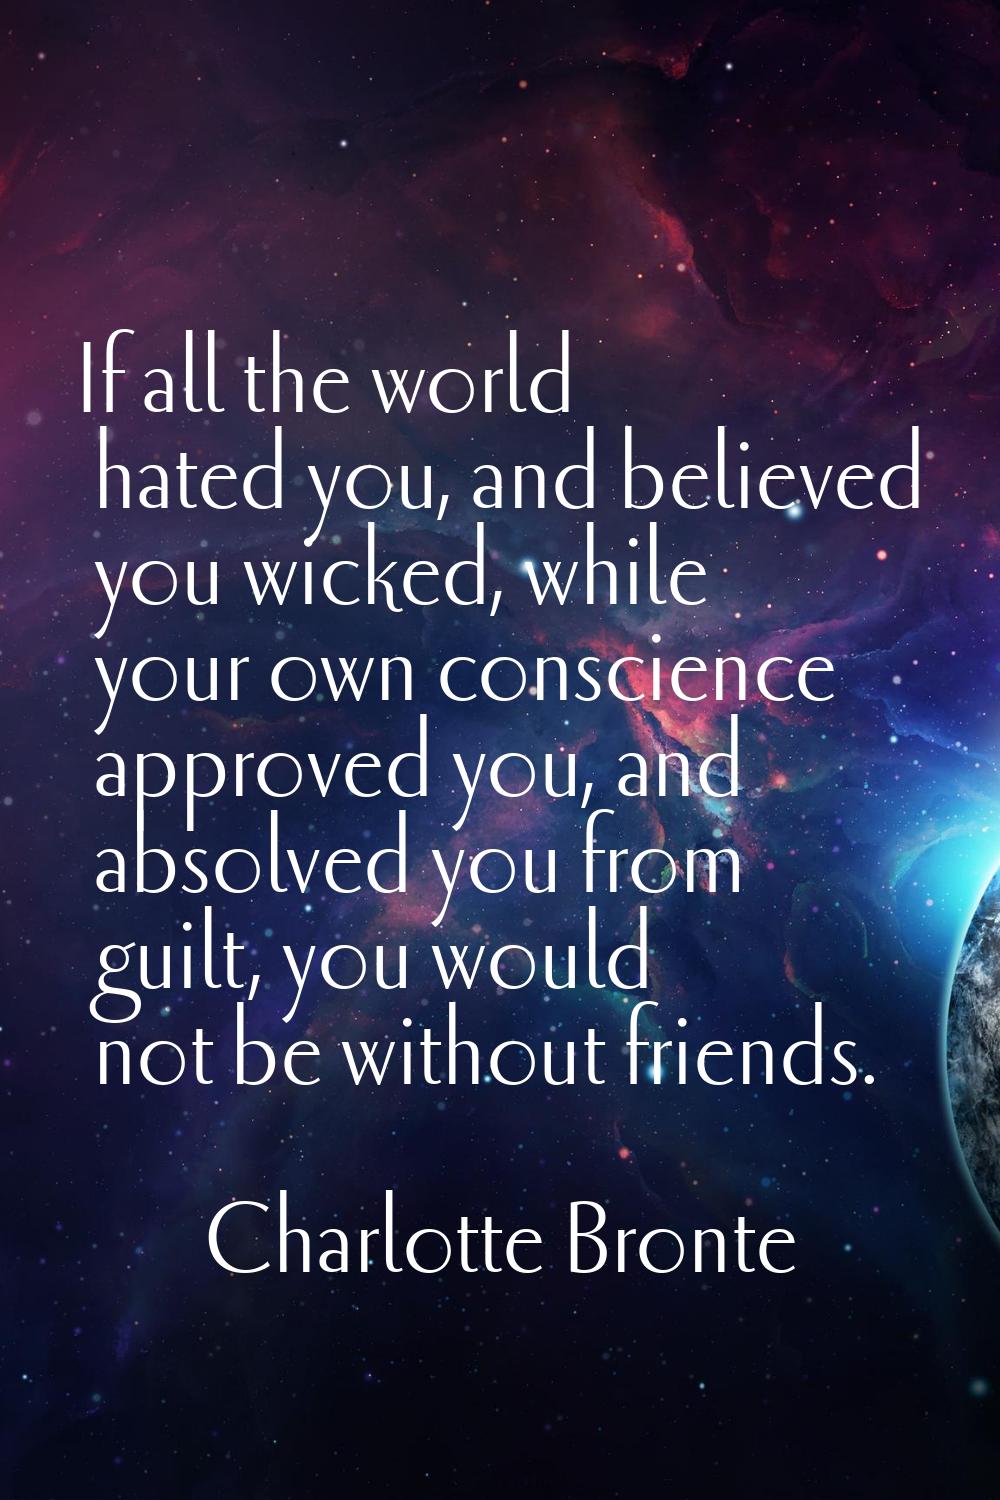 If all the world hated you, and believed you wicked, while your own conscience approved you, and ab